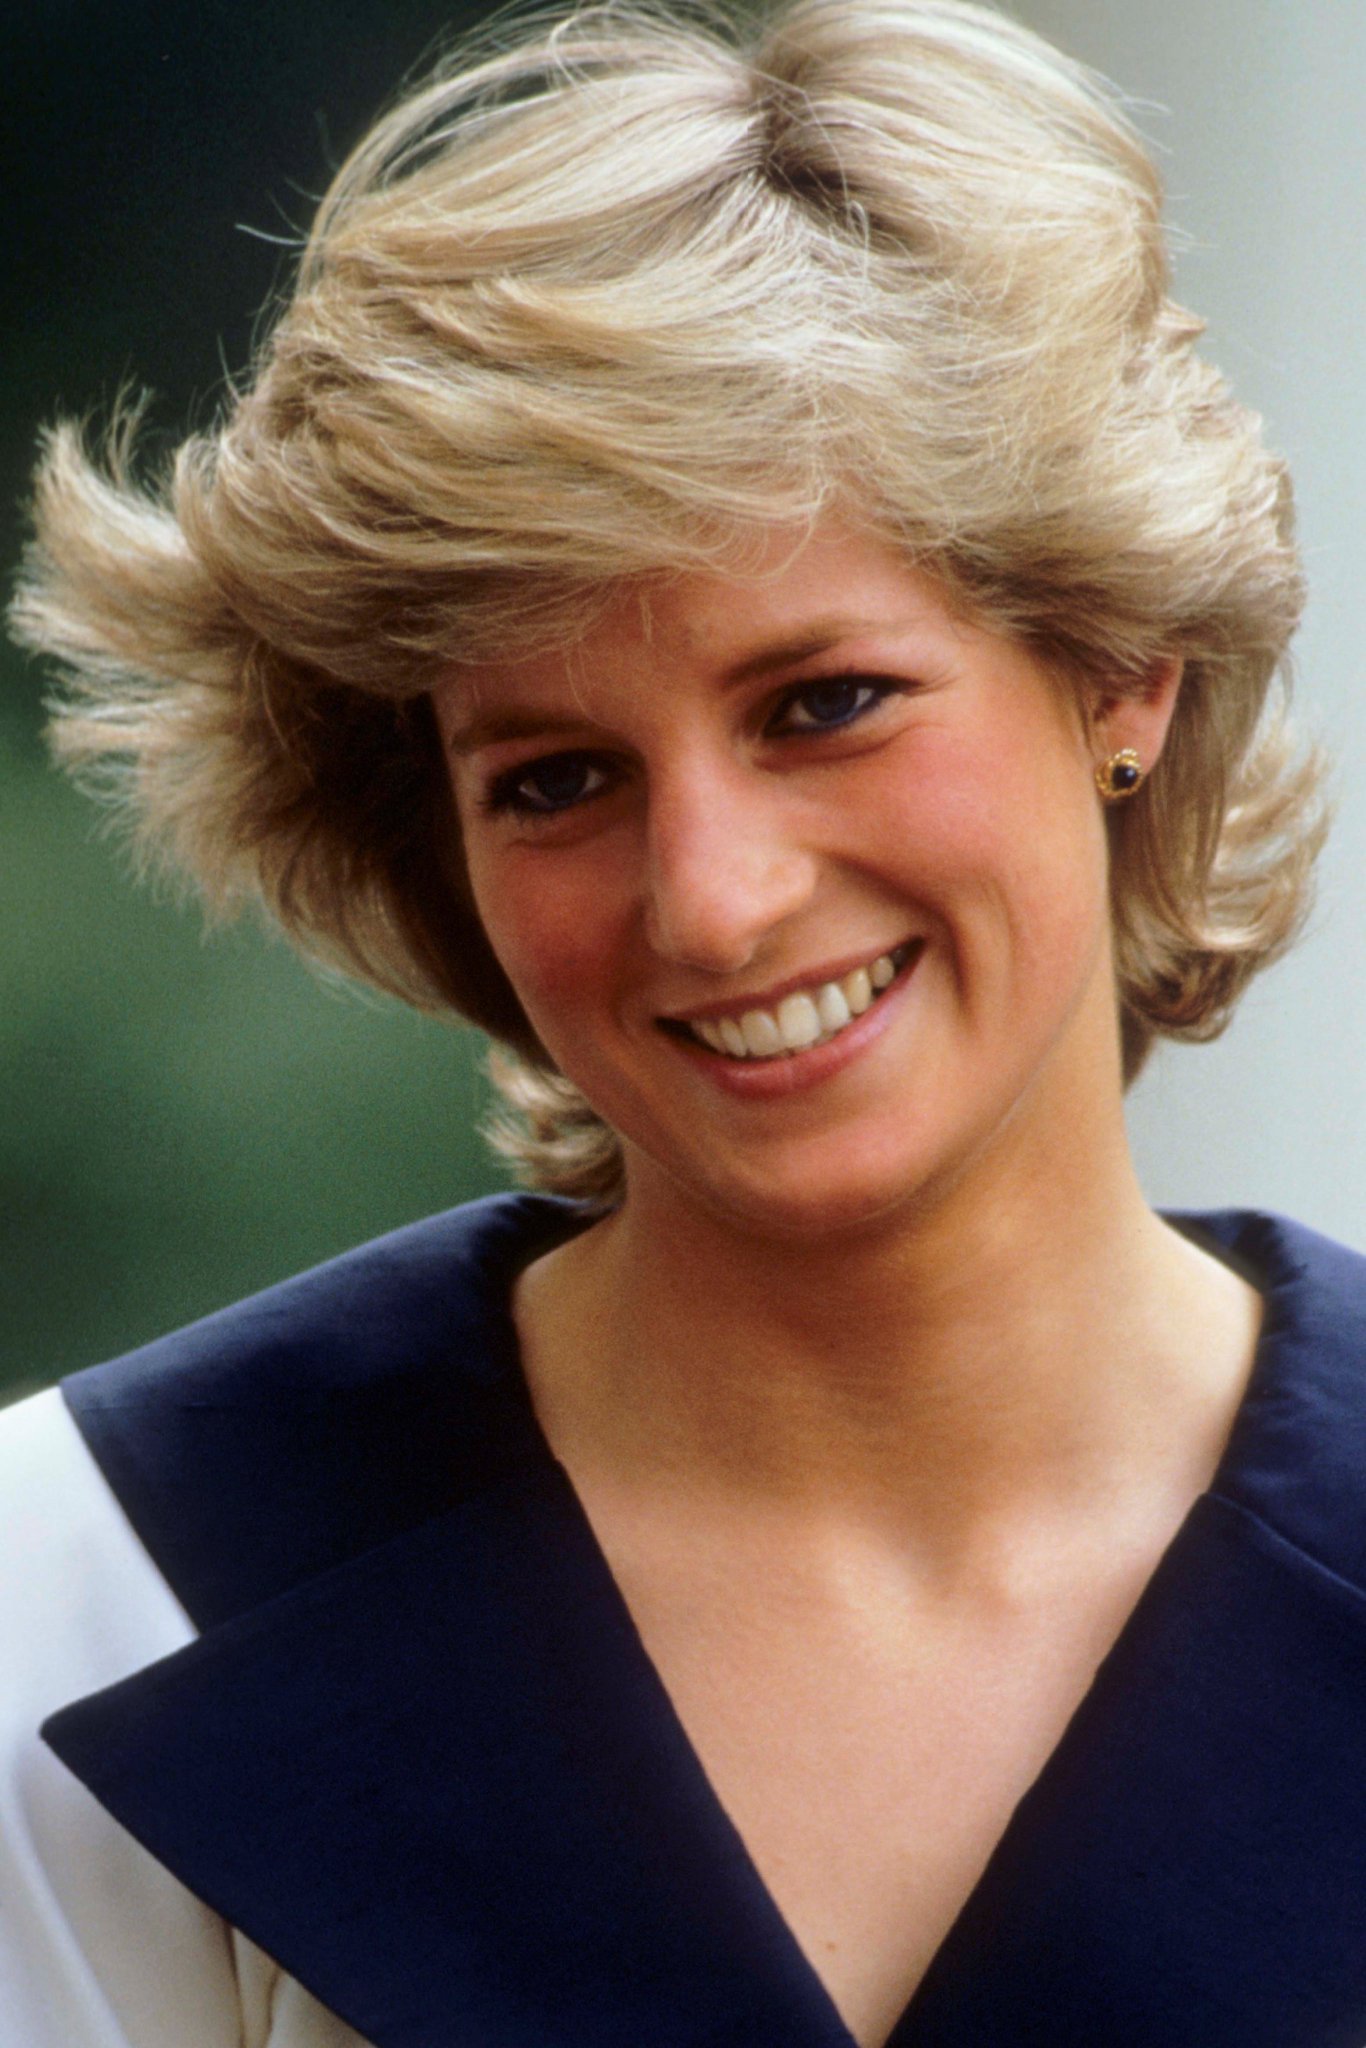 HAPPY BIRTHDAY TO PRINCESS DIANA ON WHAT WOULD HAVE BEEN HER 58TH BIRTHDAY. REST IN PEACE. 